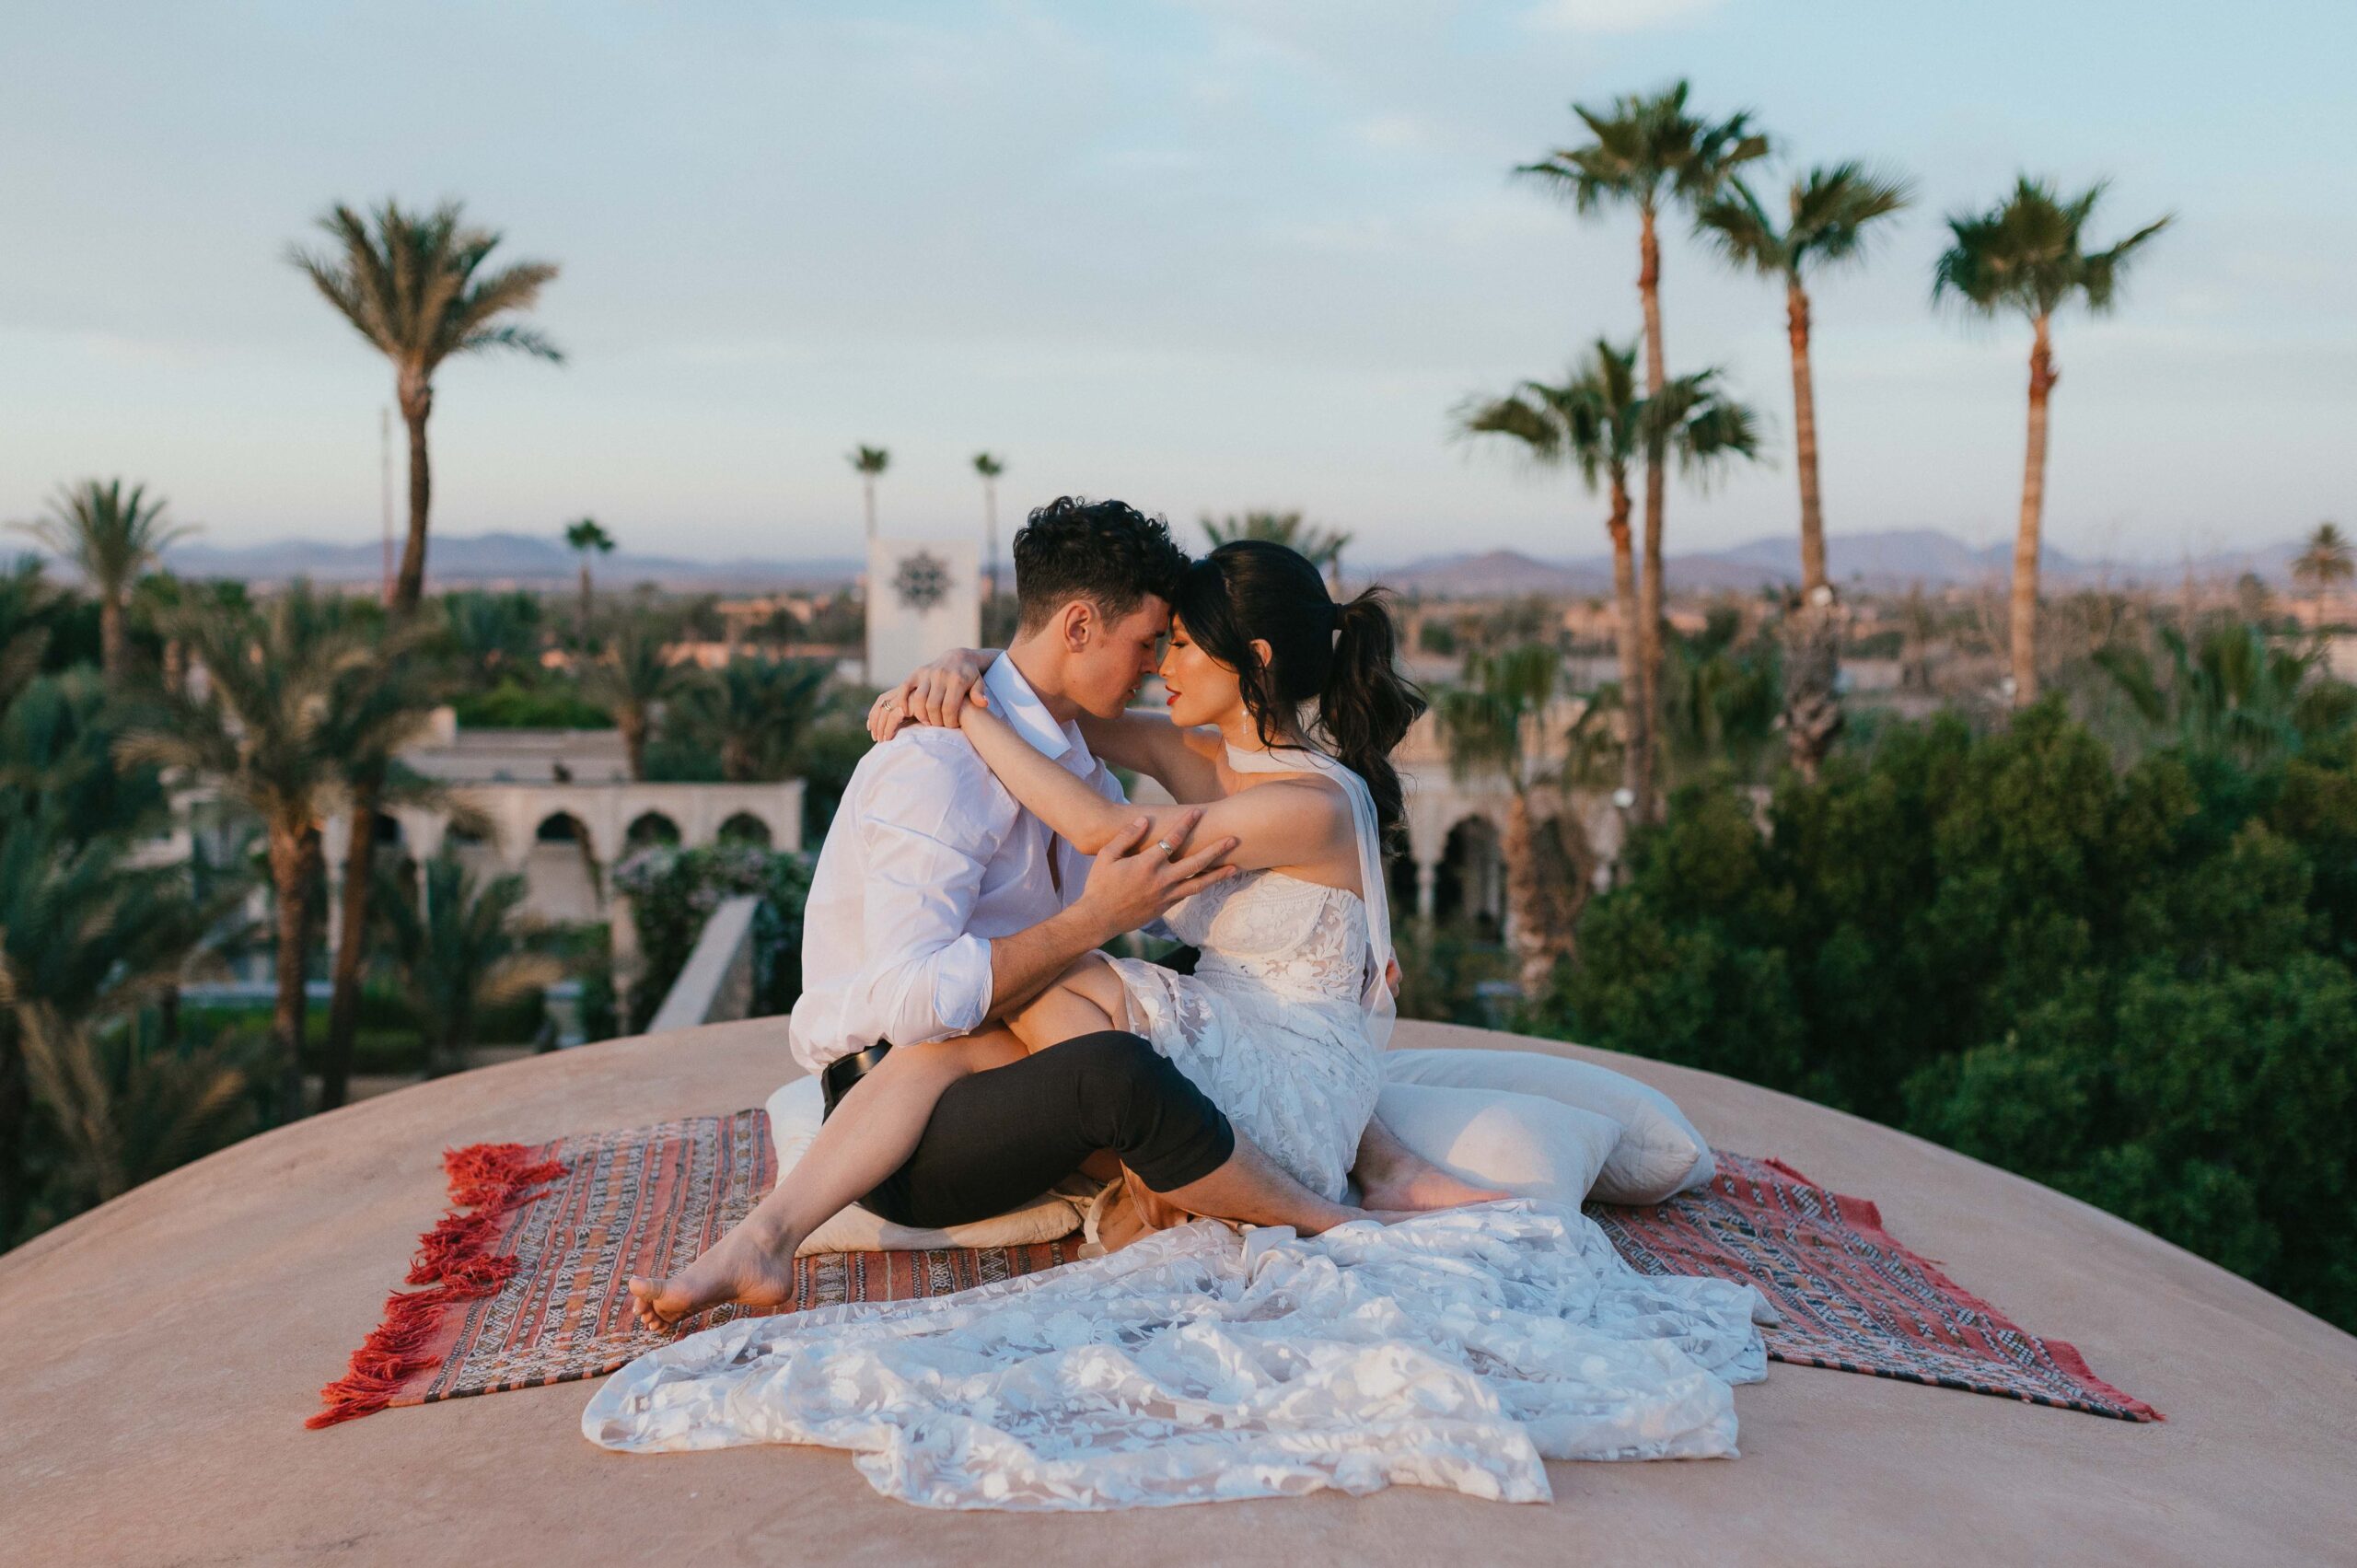 Moira and Tighe in wedding attire after their ceremony at sunset sitting on roof top at Palais Namaskar.